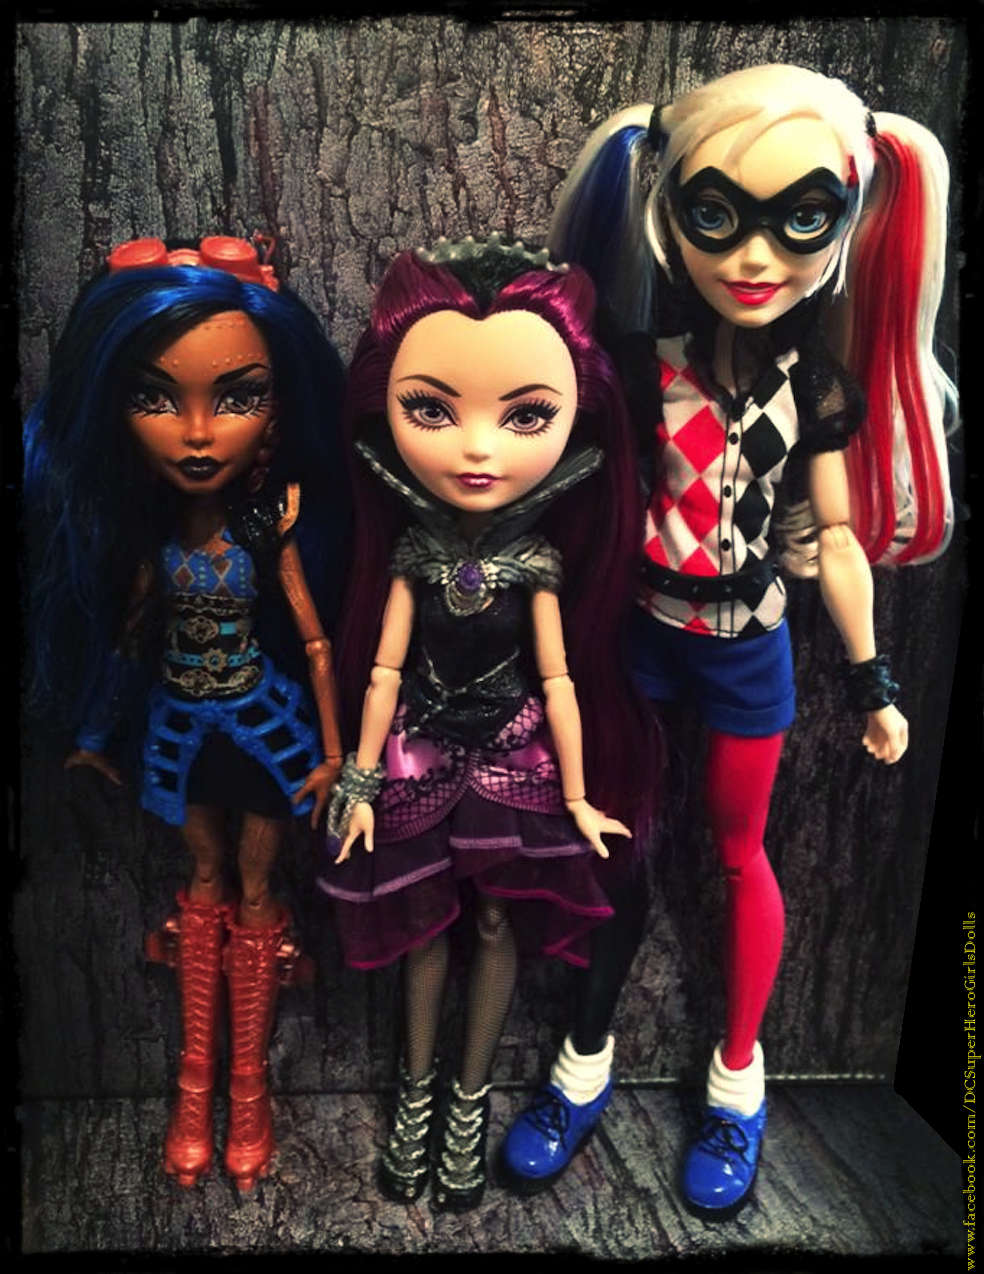 Here’s a picture of height differences between Monster High, Ever After High and DC Super Hero Girls dolls!